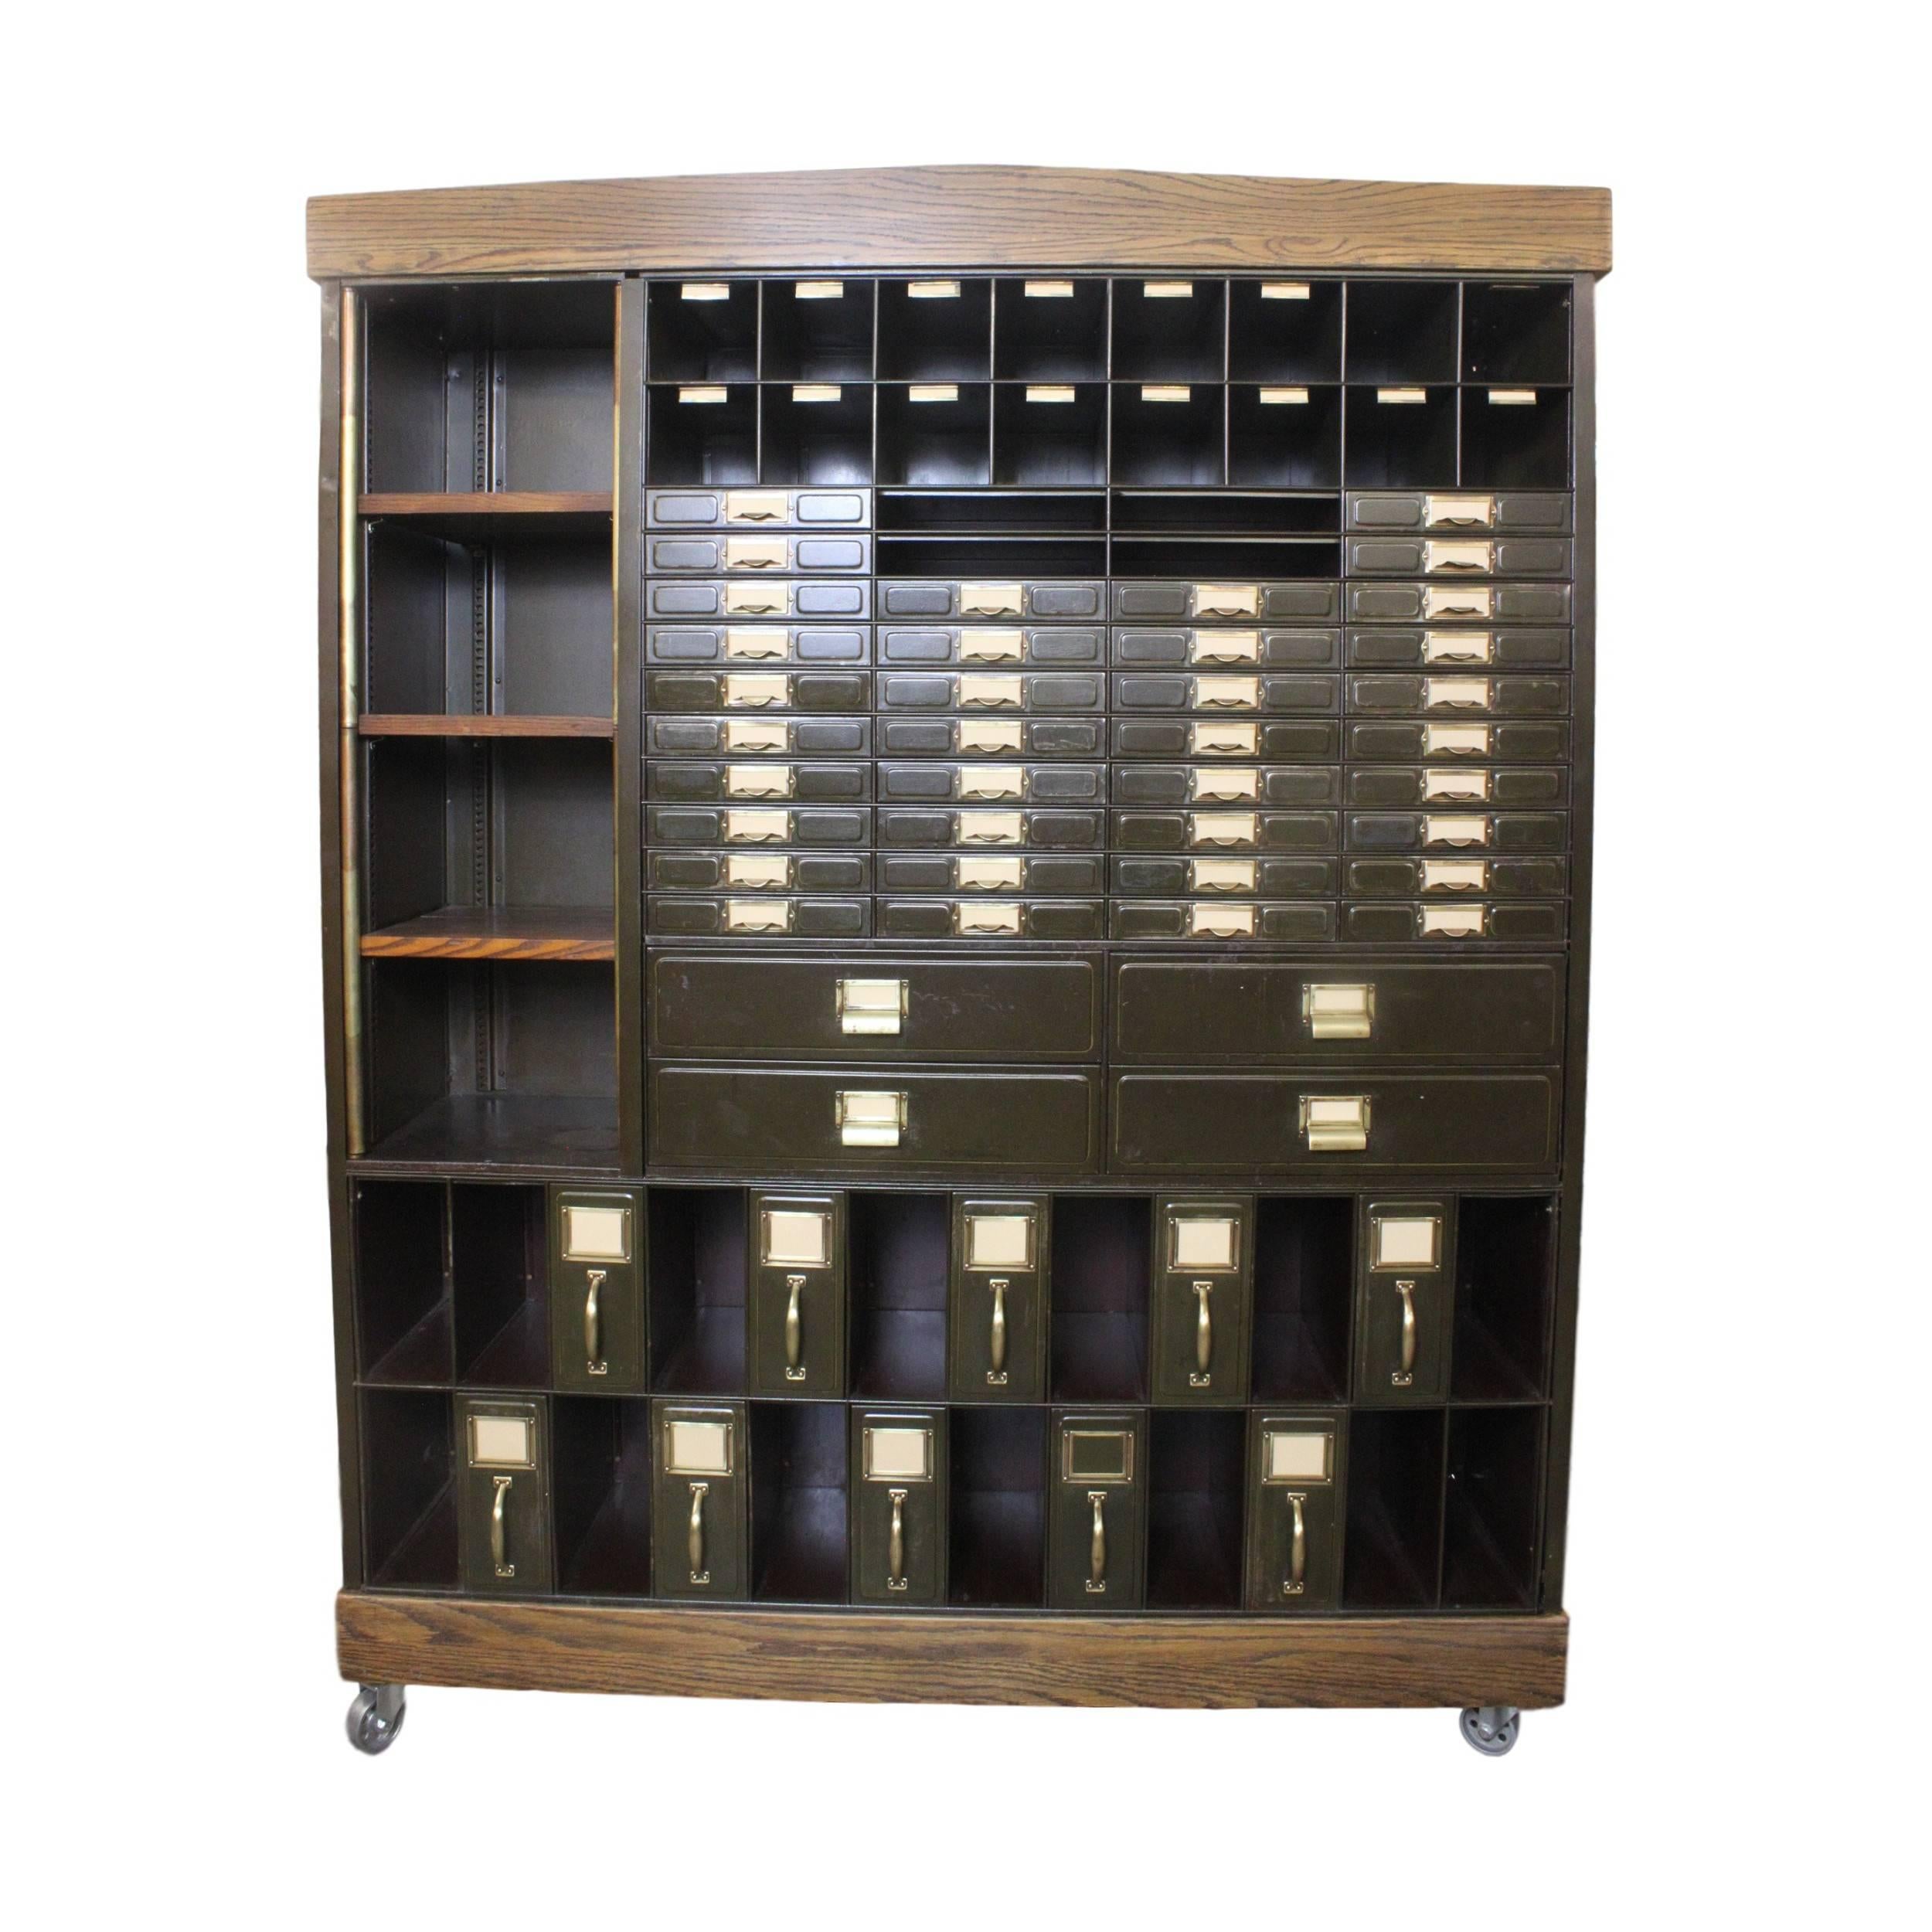 This gorgeous 1920s courthouse cabinet has been customized in our workshop with solid oak base, adjustable shelves, and crown. Original green-painted steel cabinetry is complimented with original brass hardware or accents and original gold